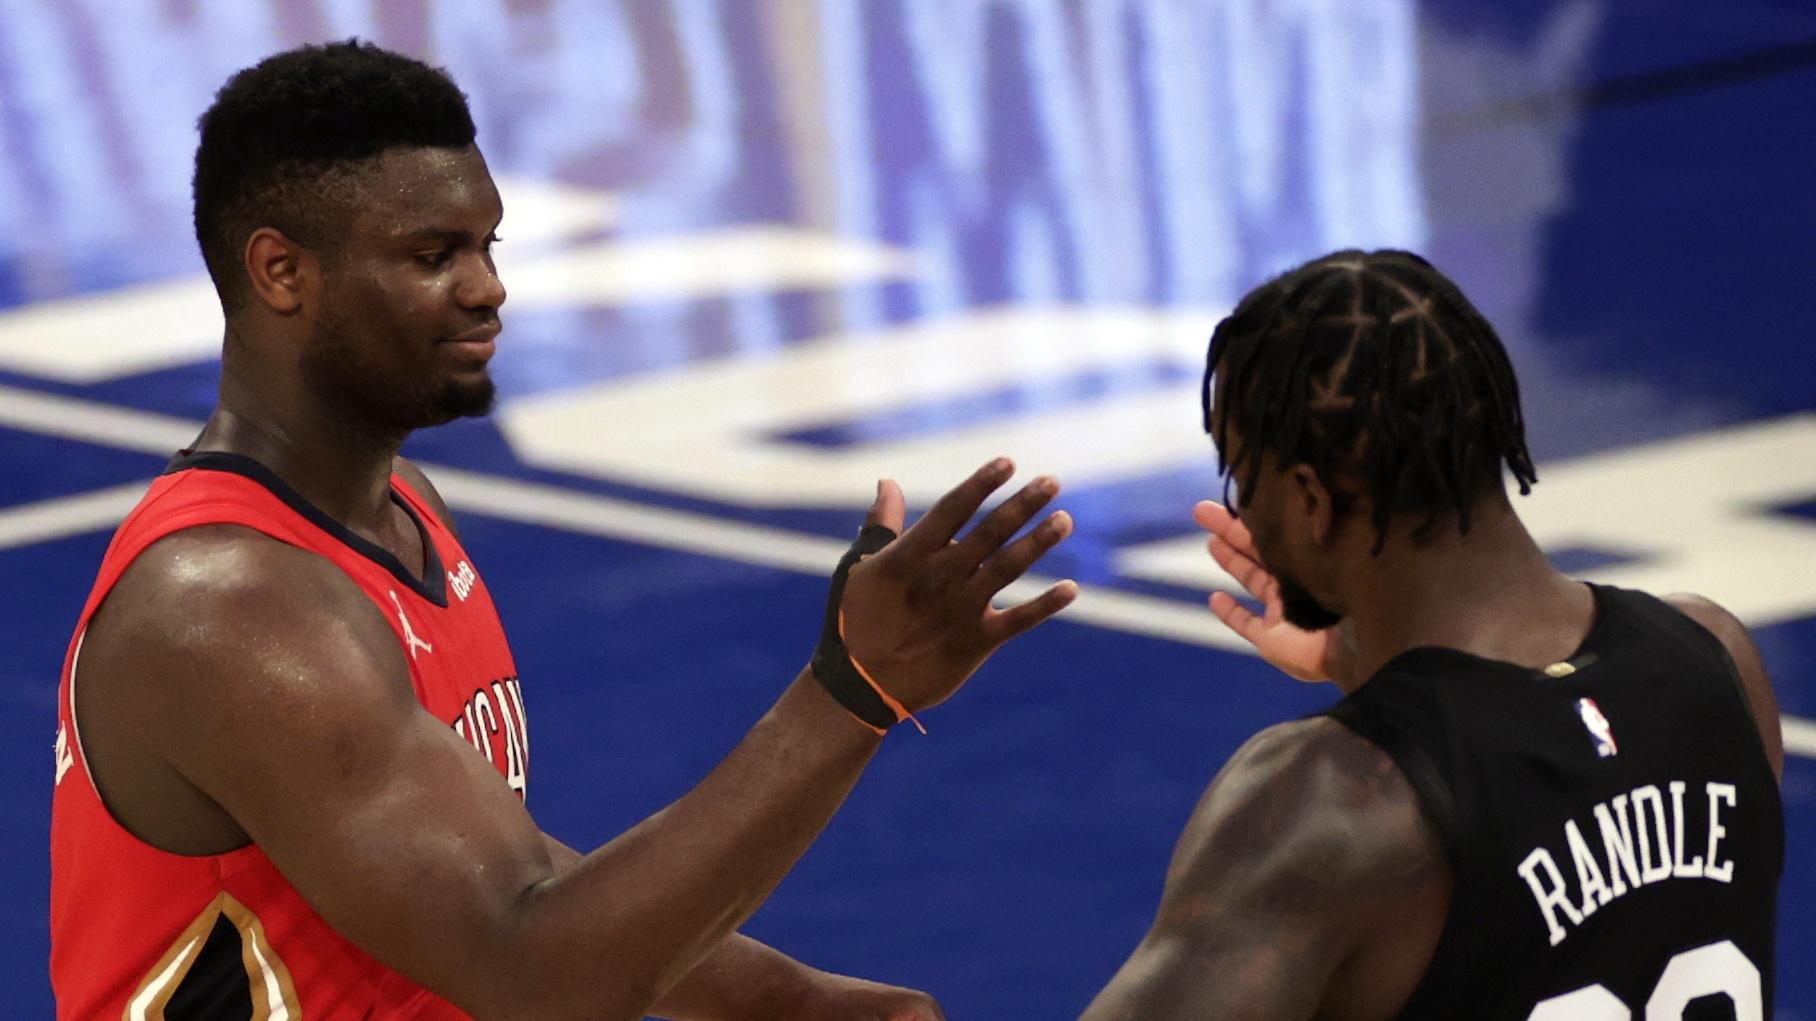 New Orleans Pelicans forward Zion Williamson shakes hands with New York Knicks forward Julius Randle (30) after overtime at Madison Square Garden. The Knicks won in overtime 122-112. / © POOL PHOTOS-USA TODAY Sports